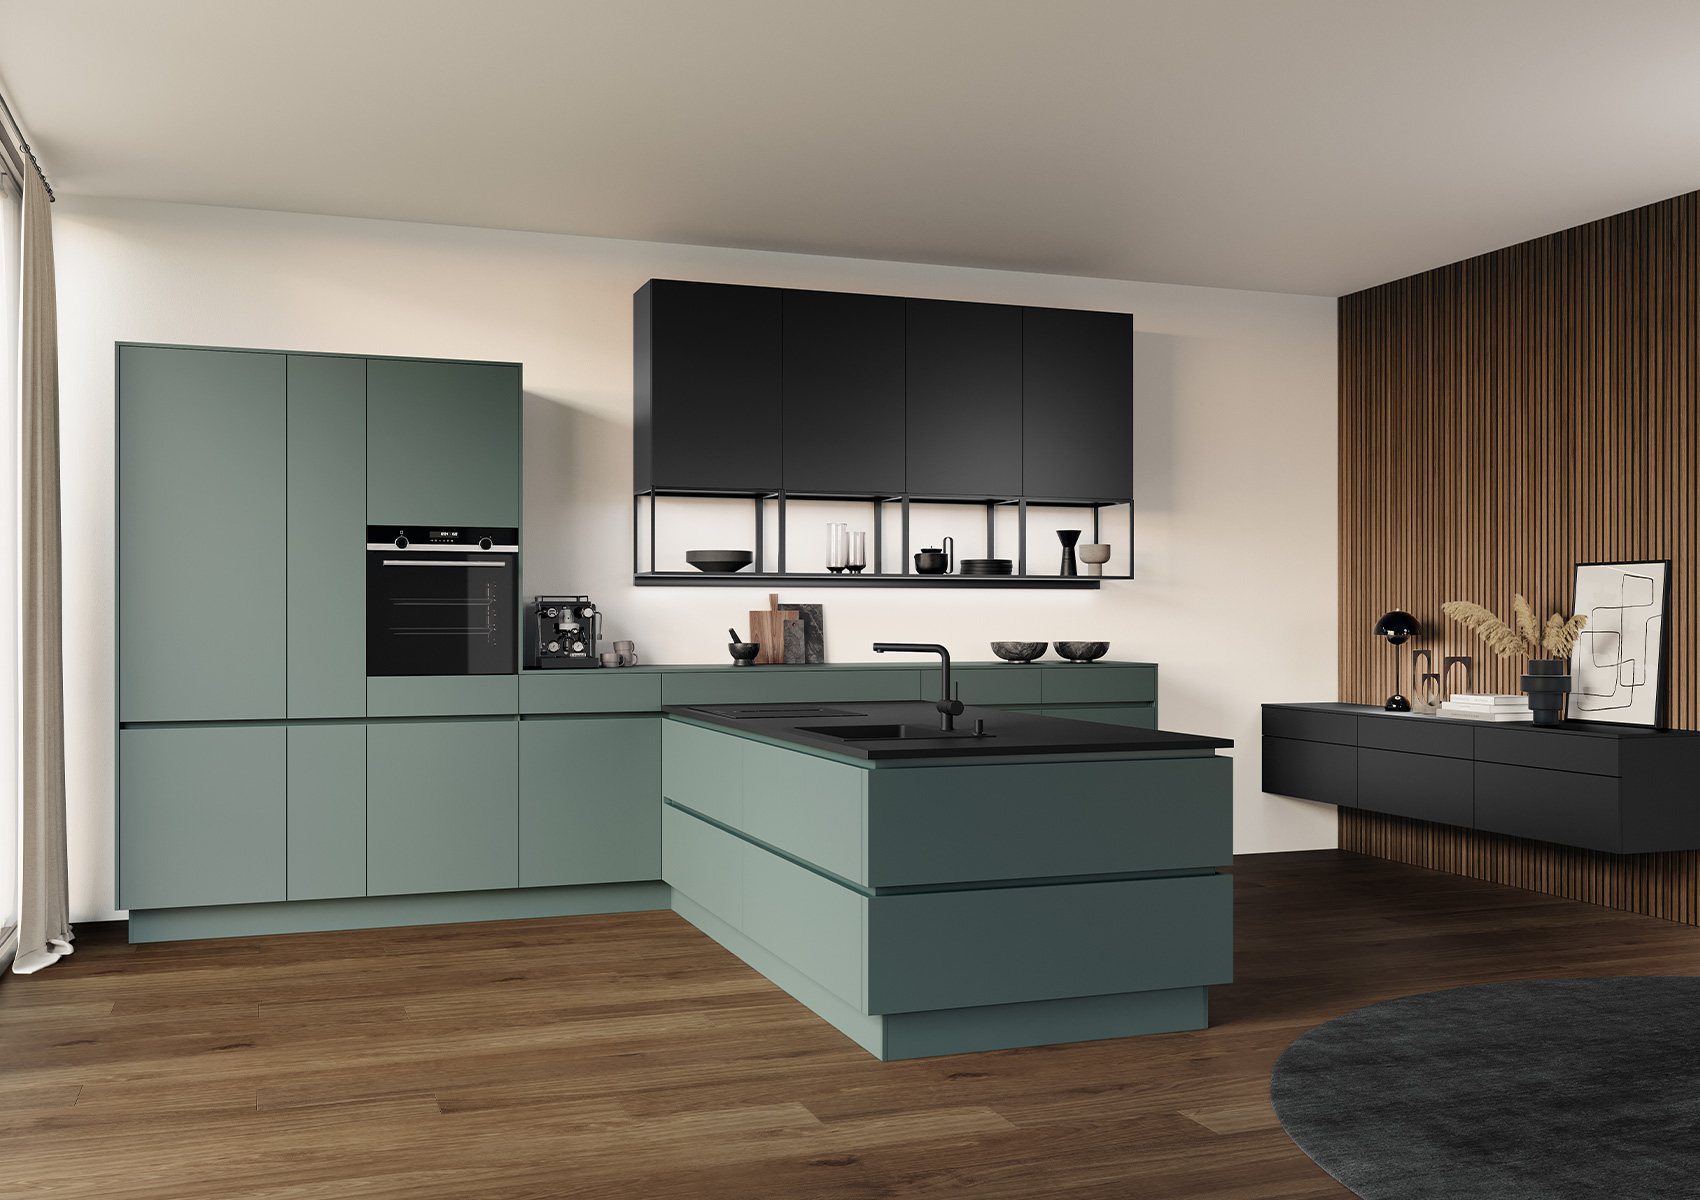 Kitchen in Selection trend color azure